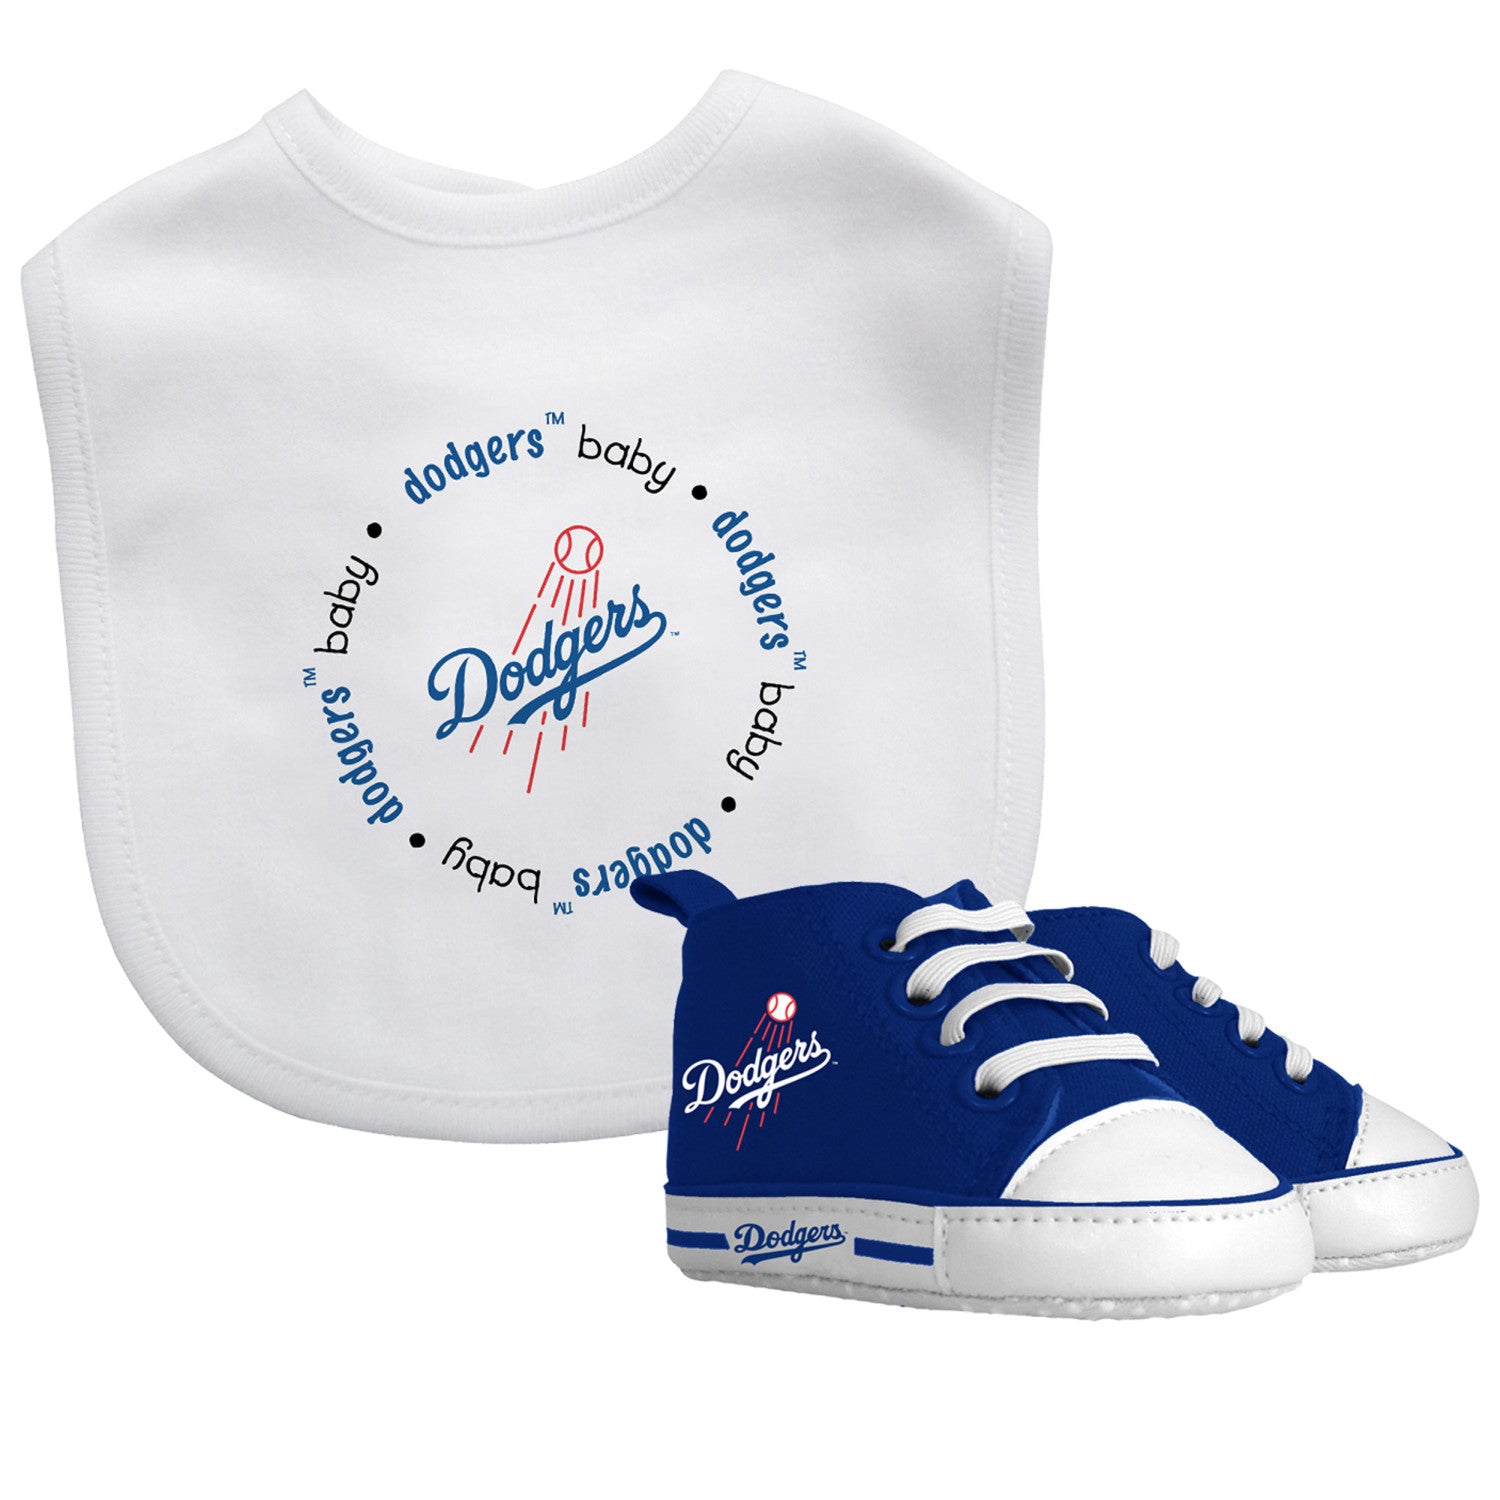 Los Angeles Dodgers - 2-Piece Baby Gift Set